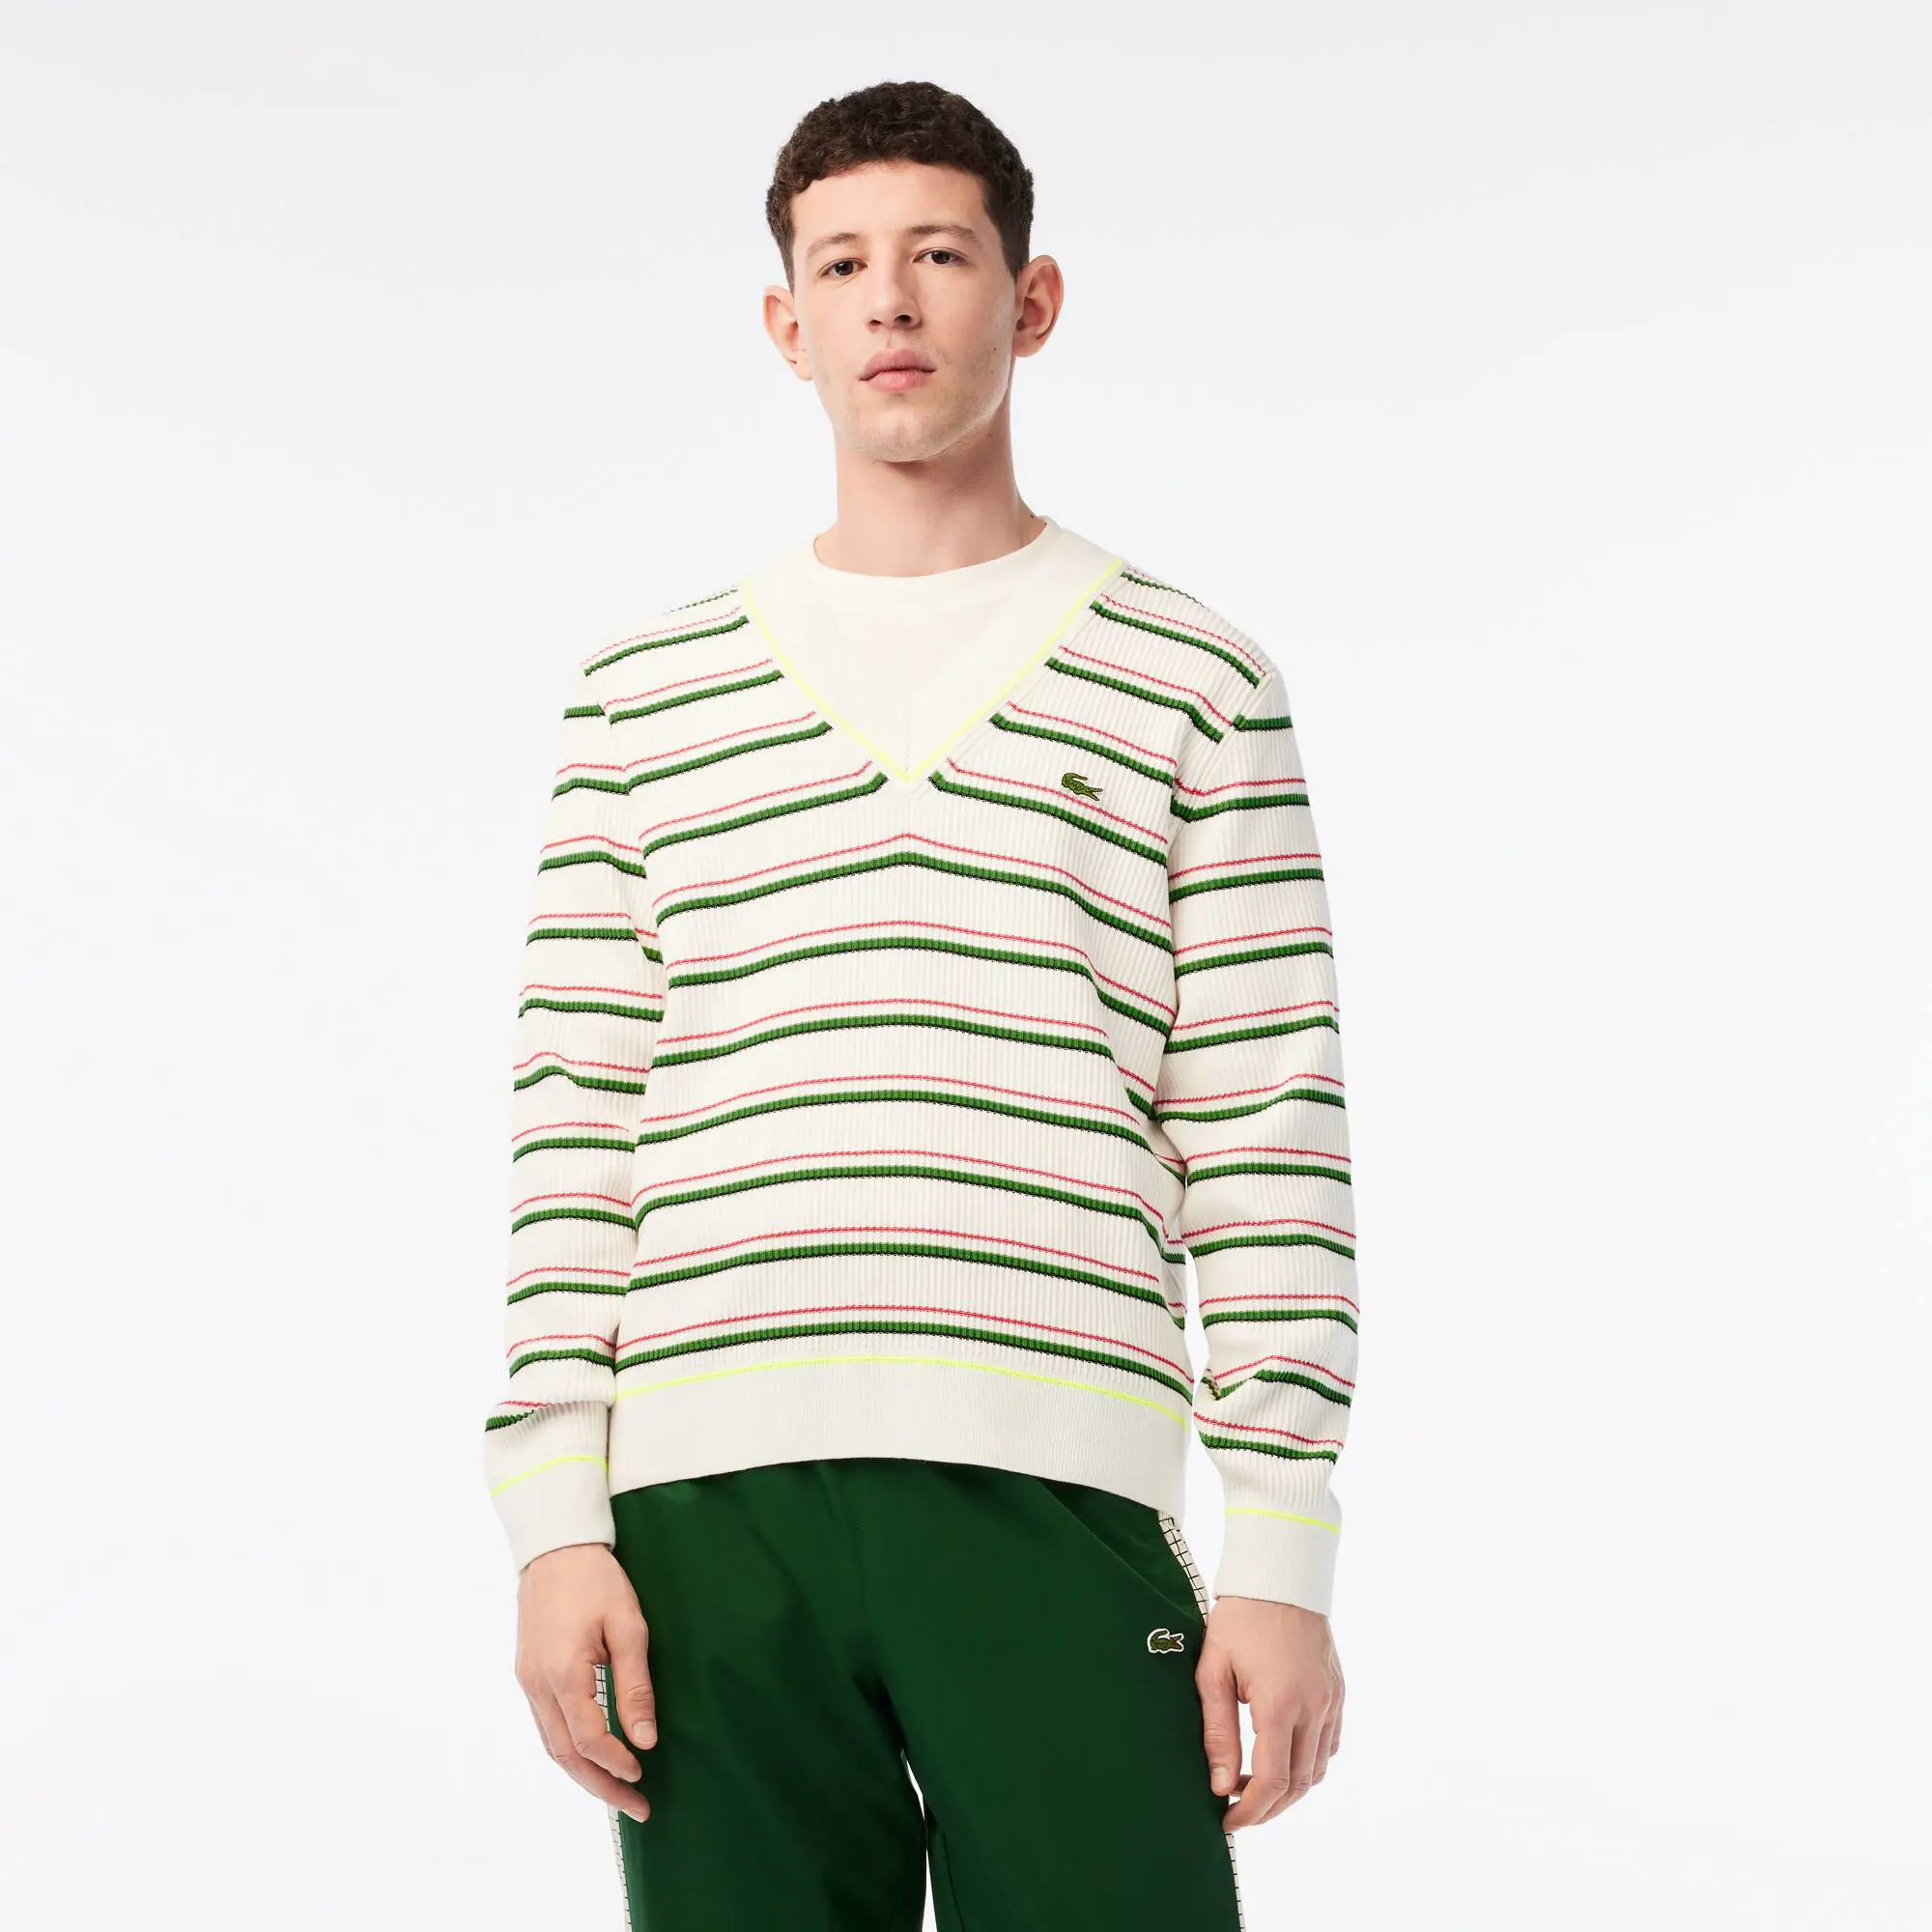 Lacoste Men’s Lacoste Striped French Made V-Neck Sweater. 1